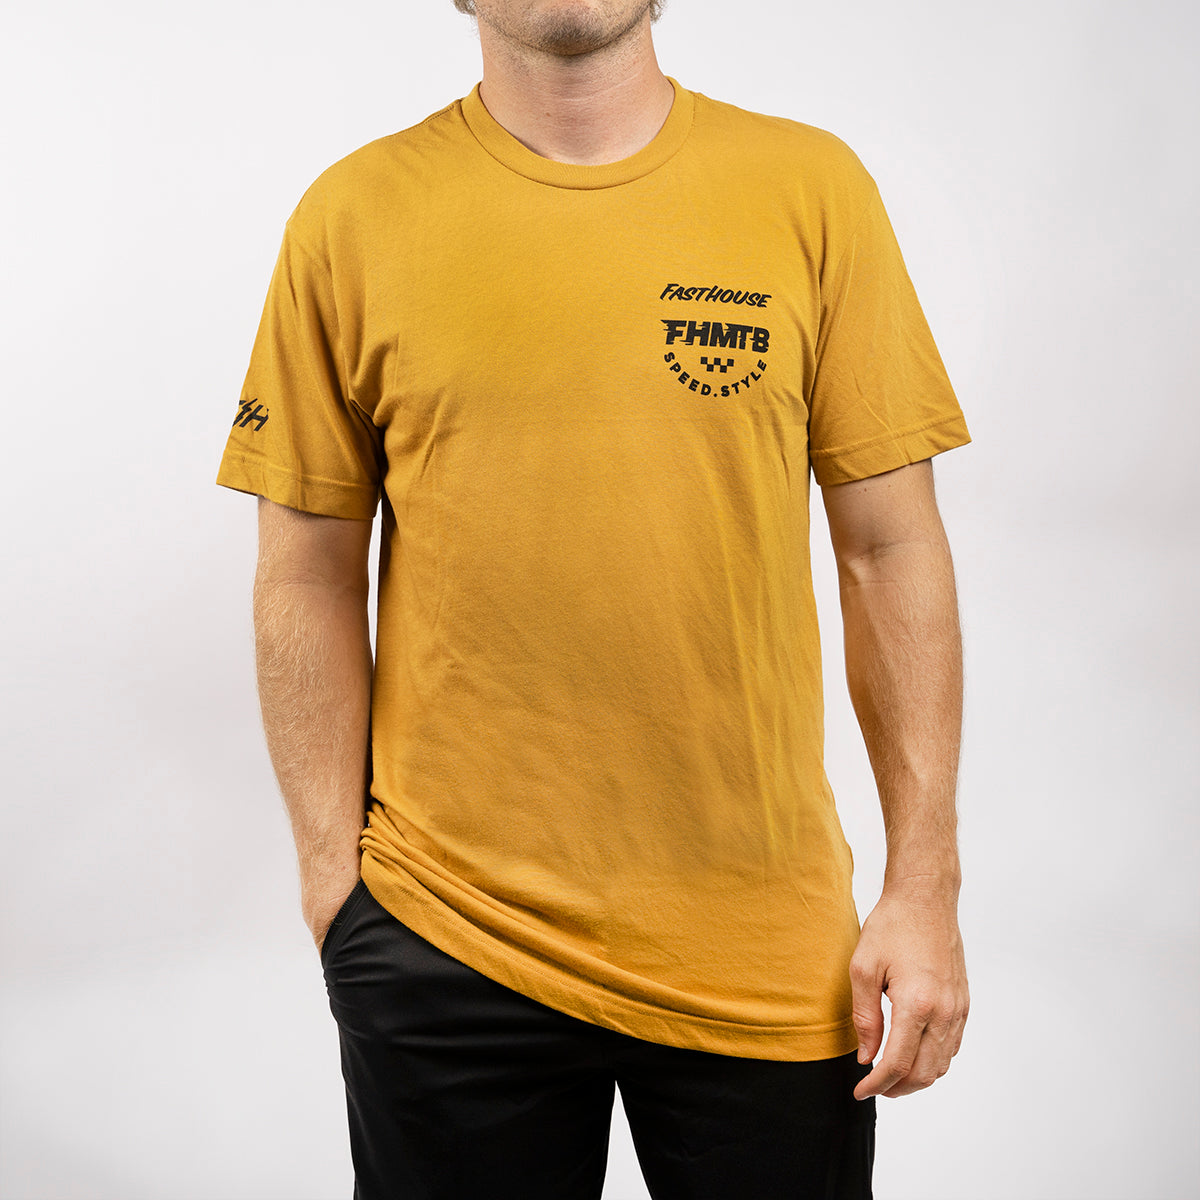 Hierarchy SS Tech Tee - Vintage Gold